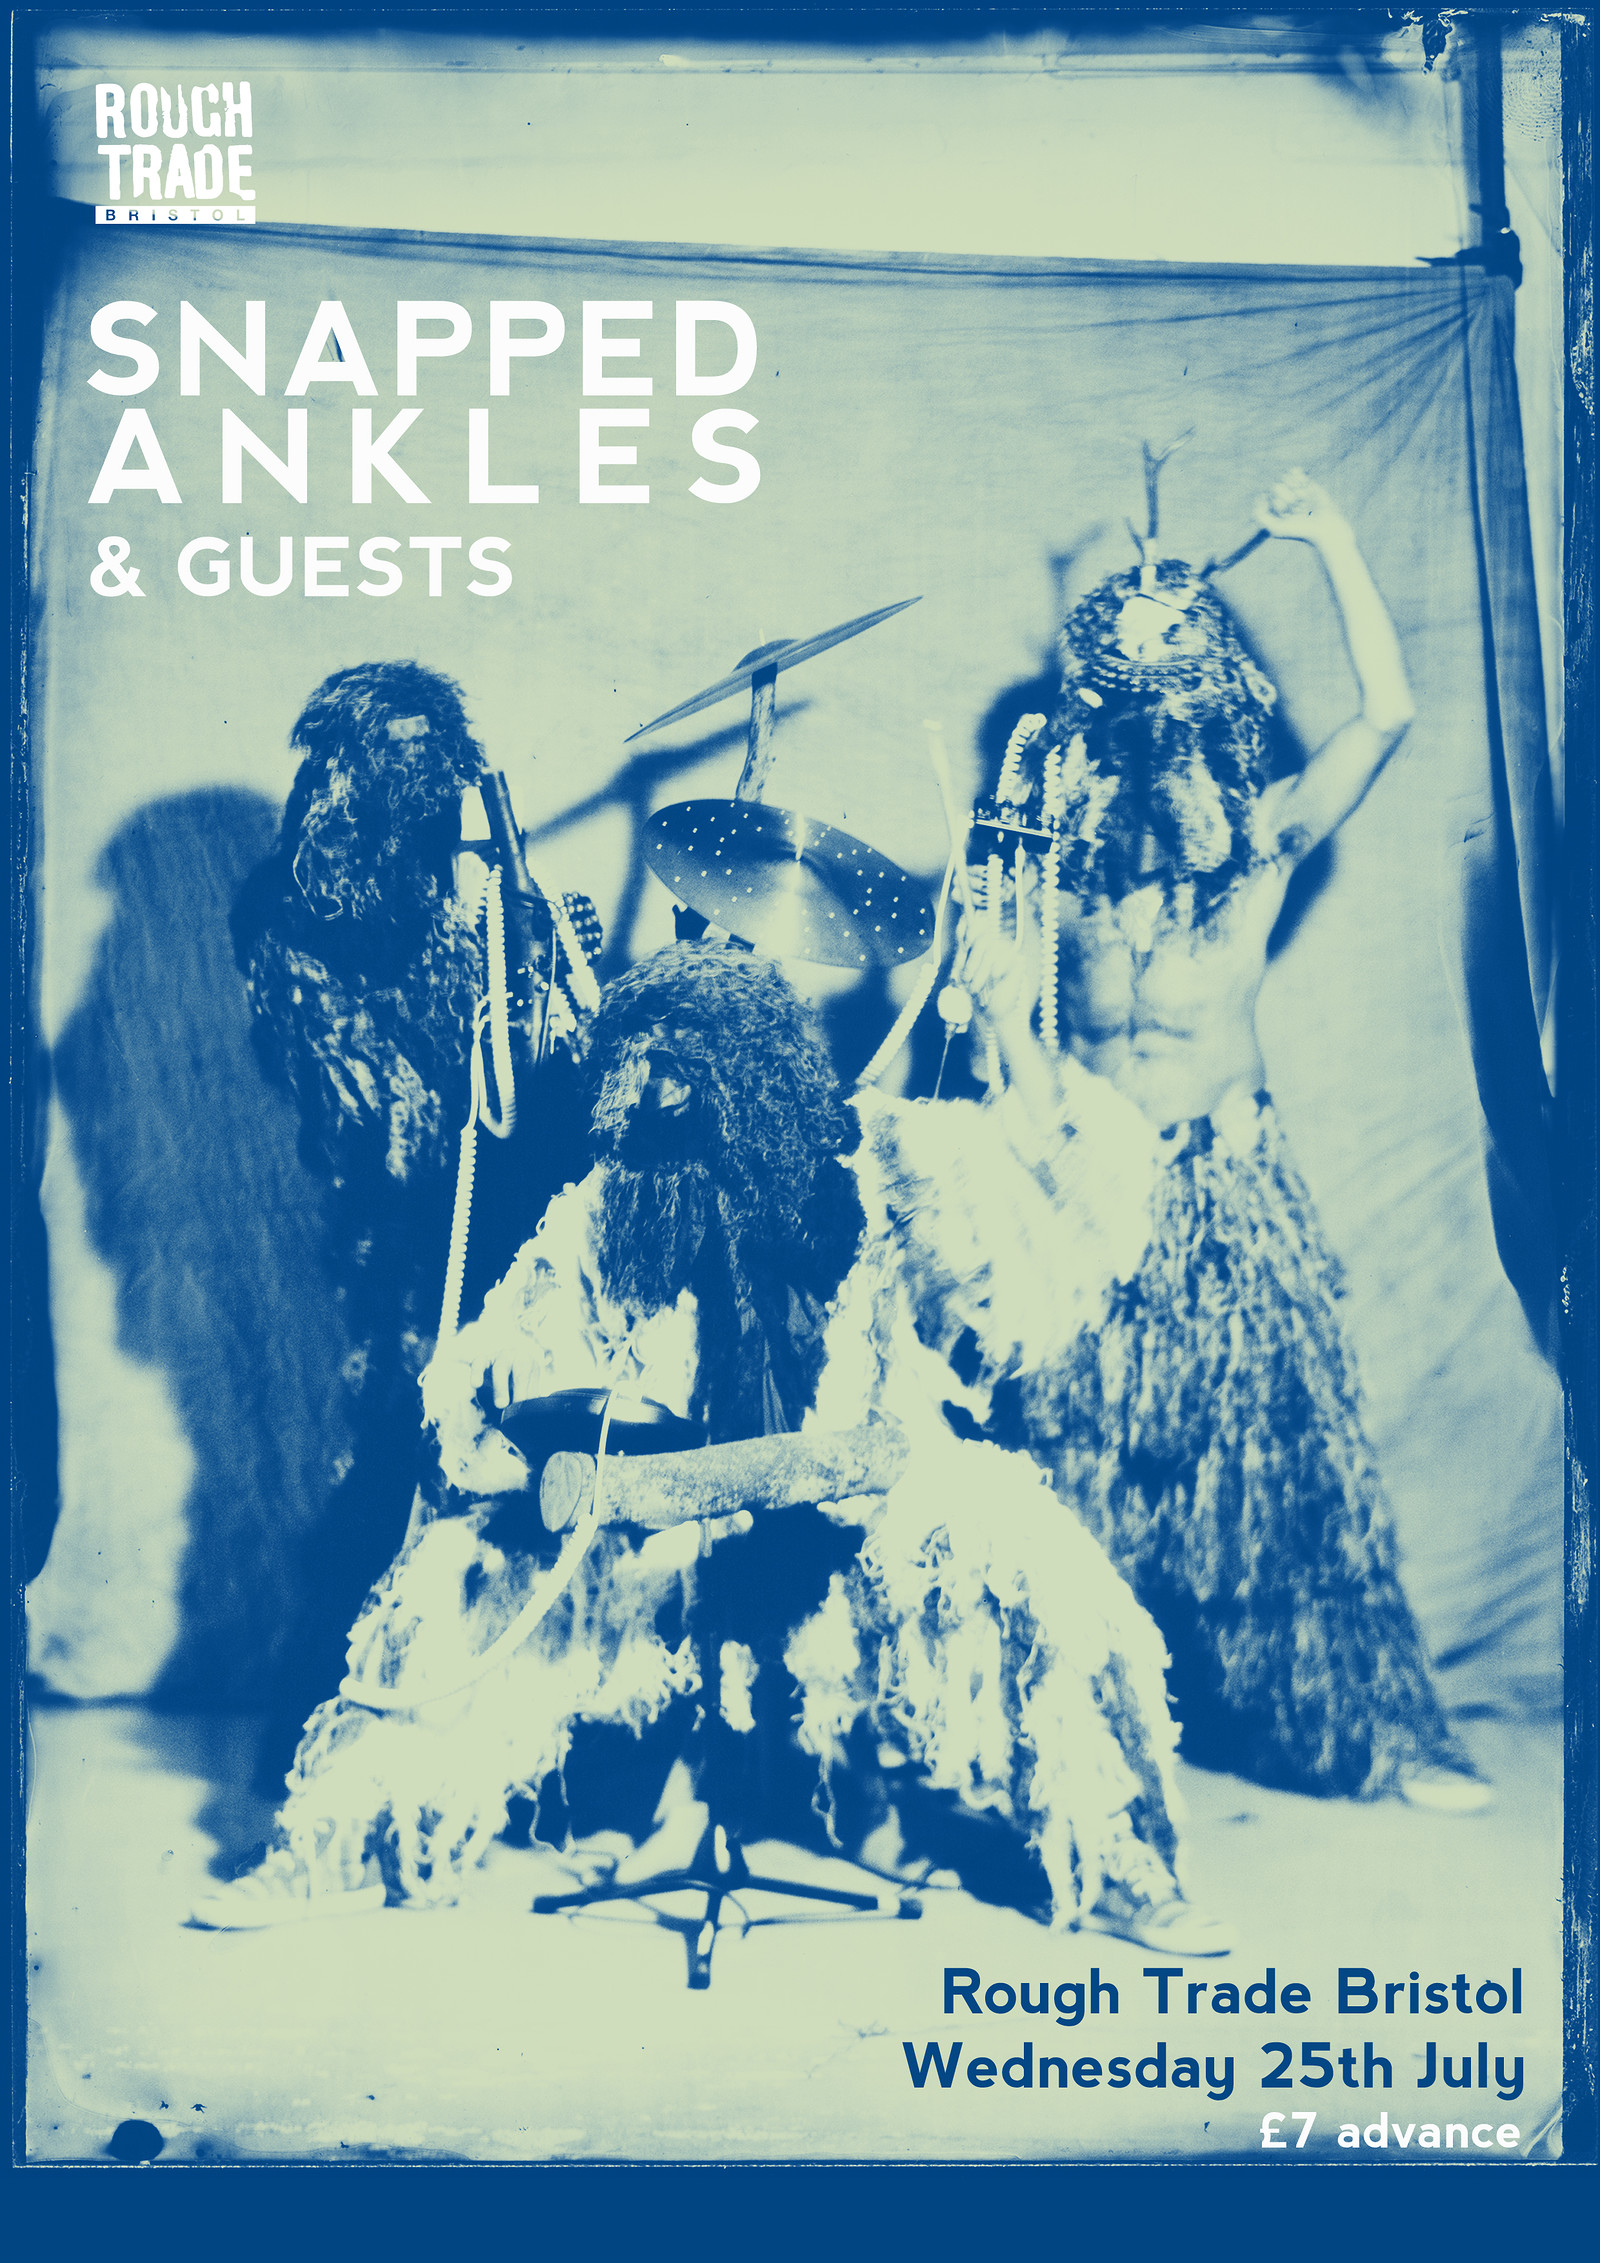 Snapped Ankles & Guests at Rough Trade Bristol